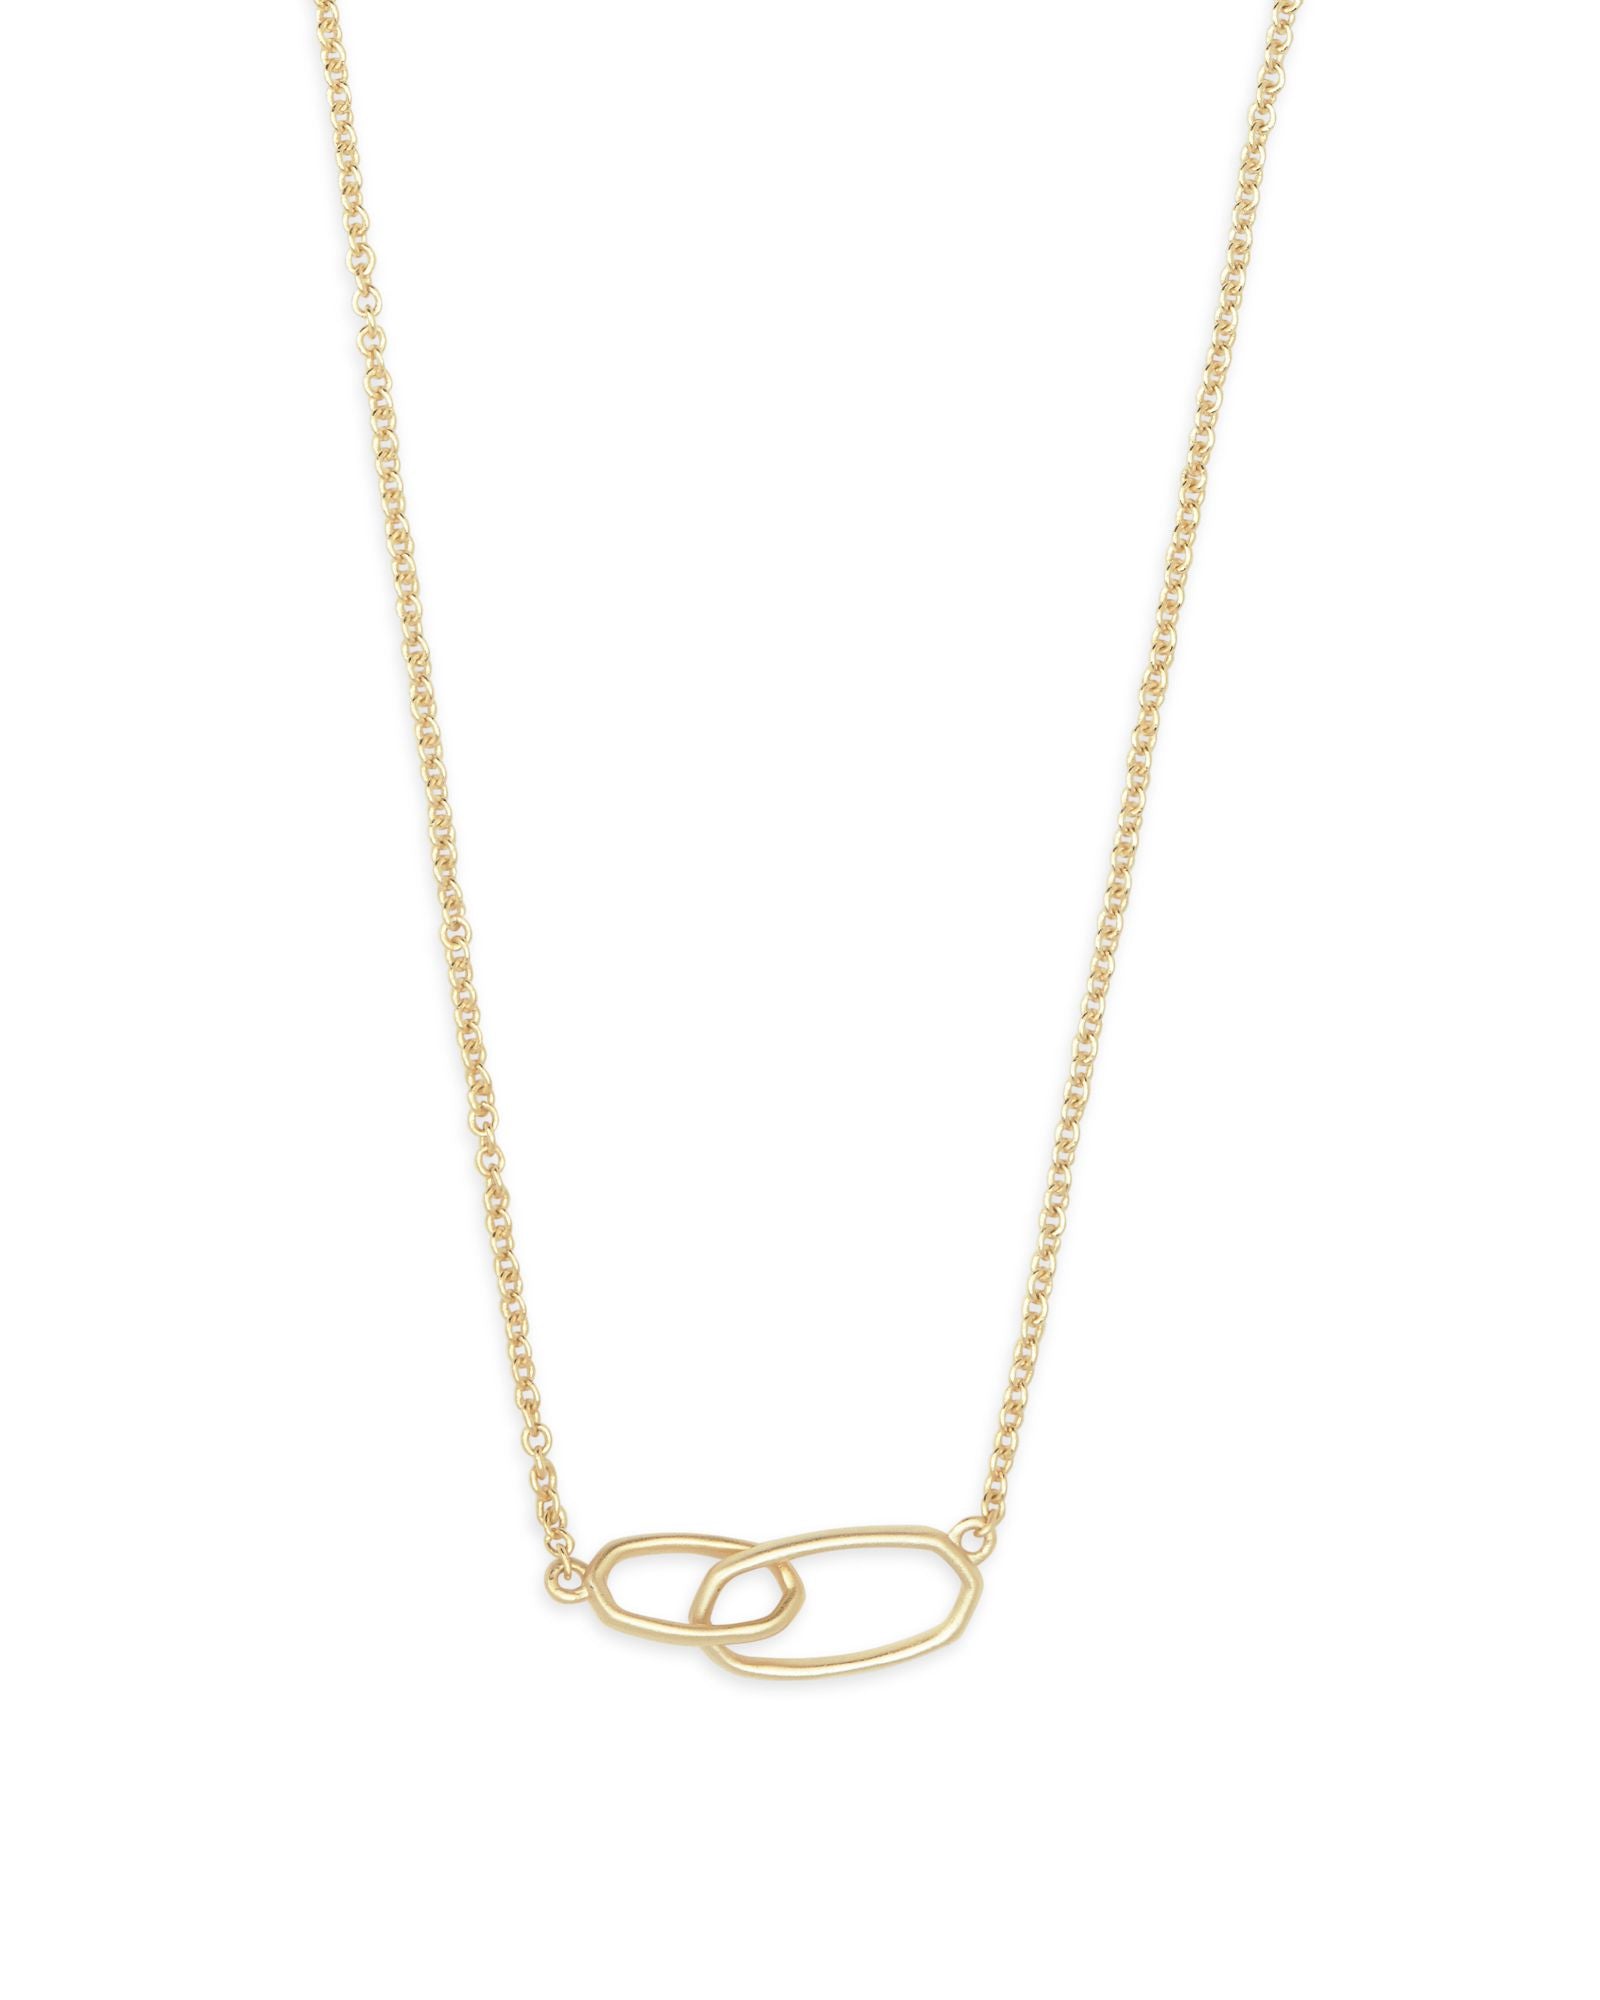 Toi et Moi 14k Yellow Gold Pendant Necklace in White Sapphire and White  Pearl | Kendra Scott